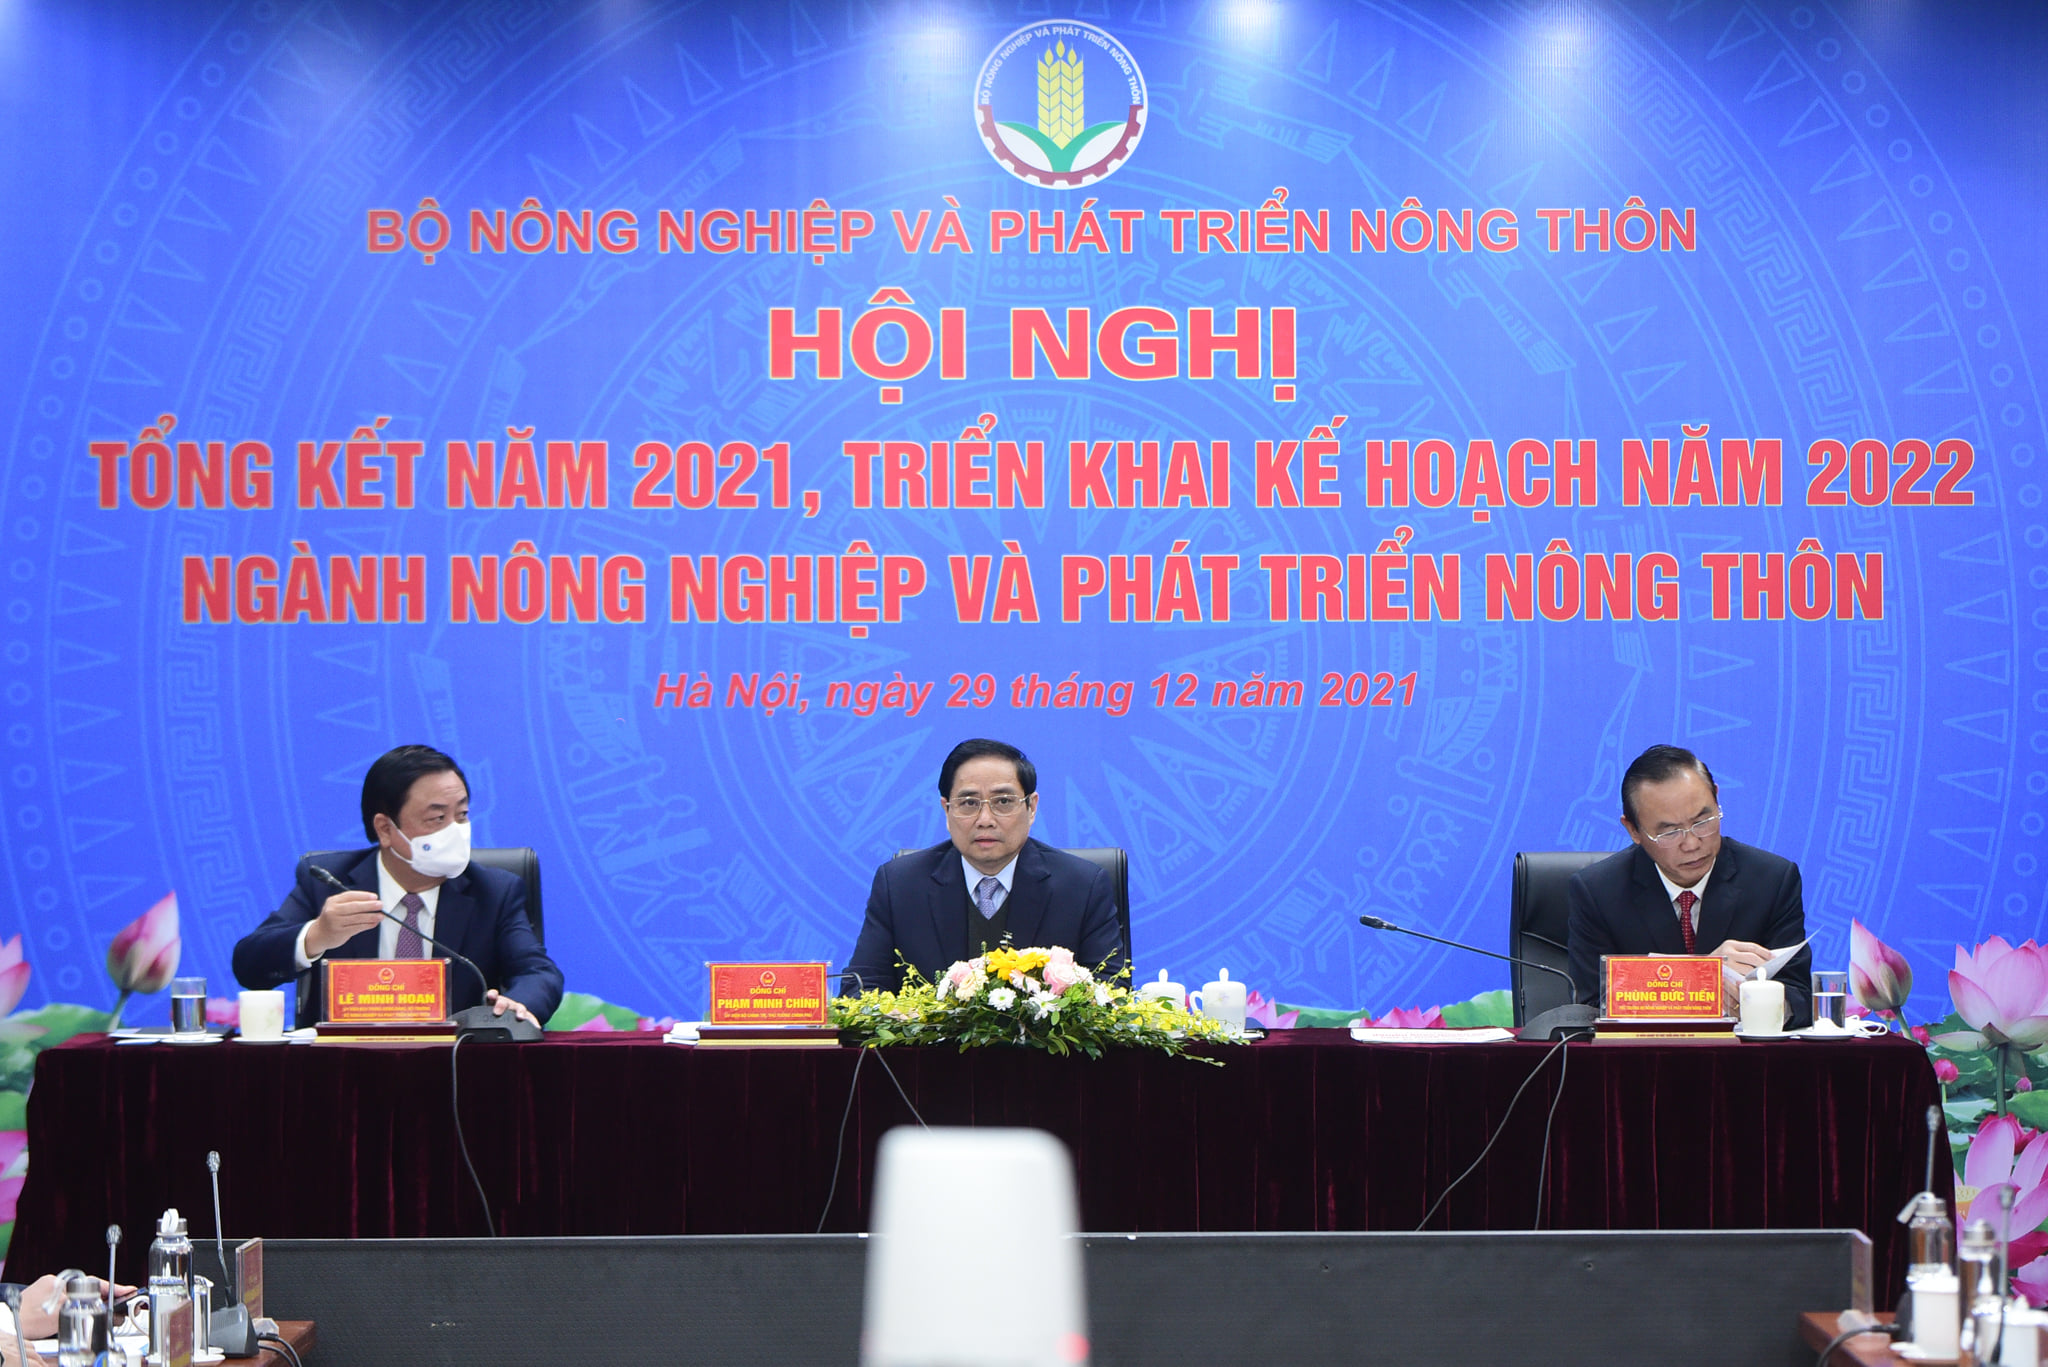 The Ministry of Agriculture and Rural Development organizes a conference in Hanoi on December 29, 2021. Photo: Tung Dinh / Tuoi Tre